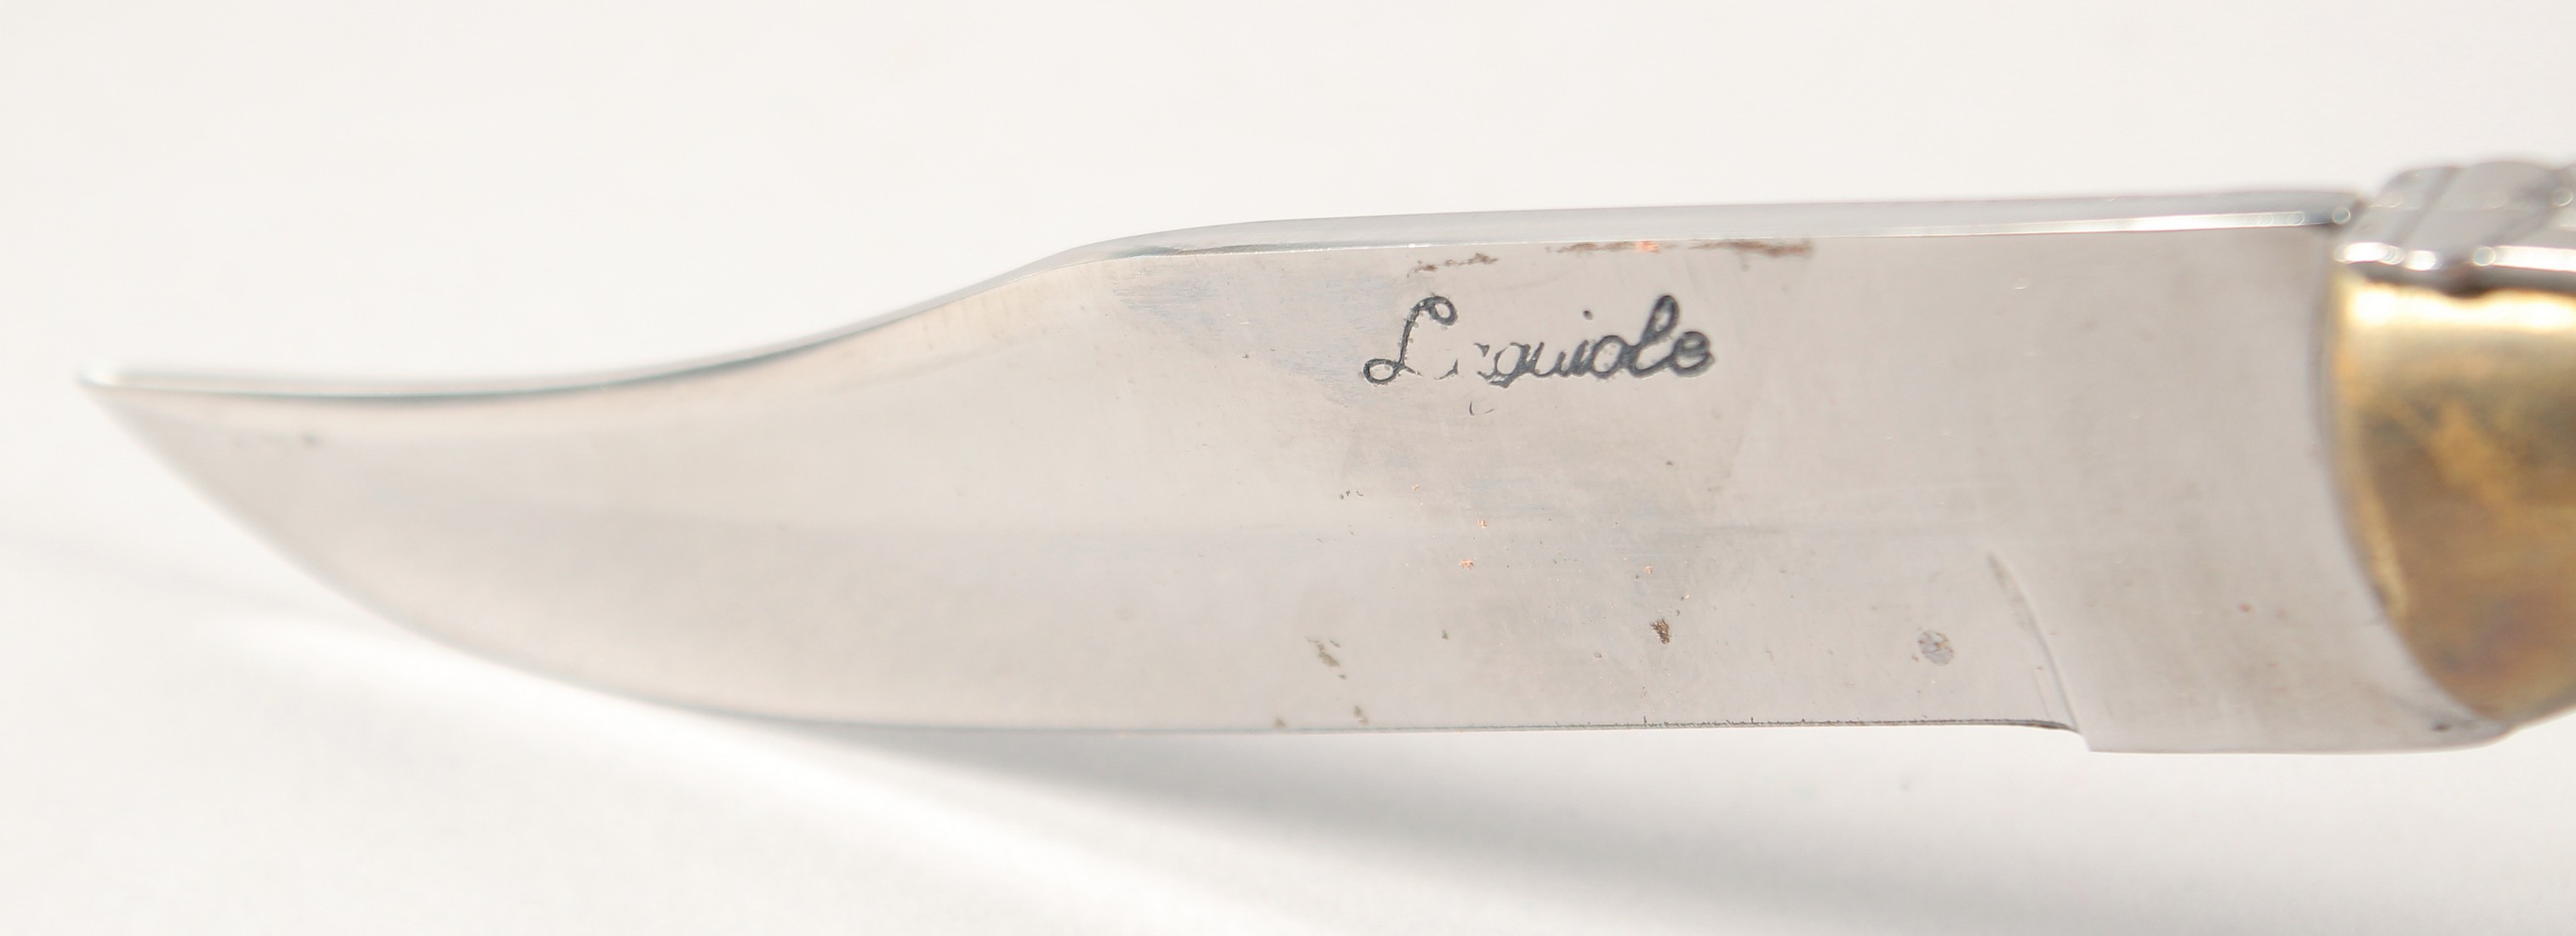 LAGUIOLE, a knife with wooden handle, in a leather sheath, 9.5" long. - Image 2 of 5